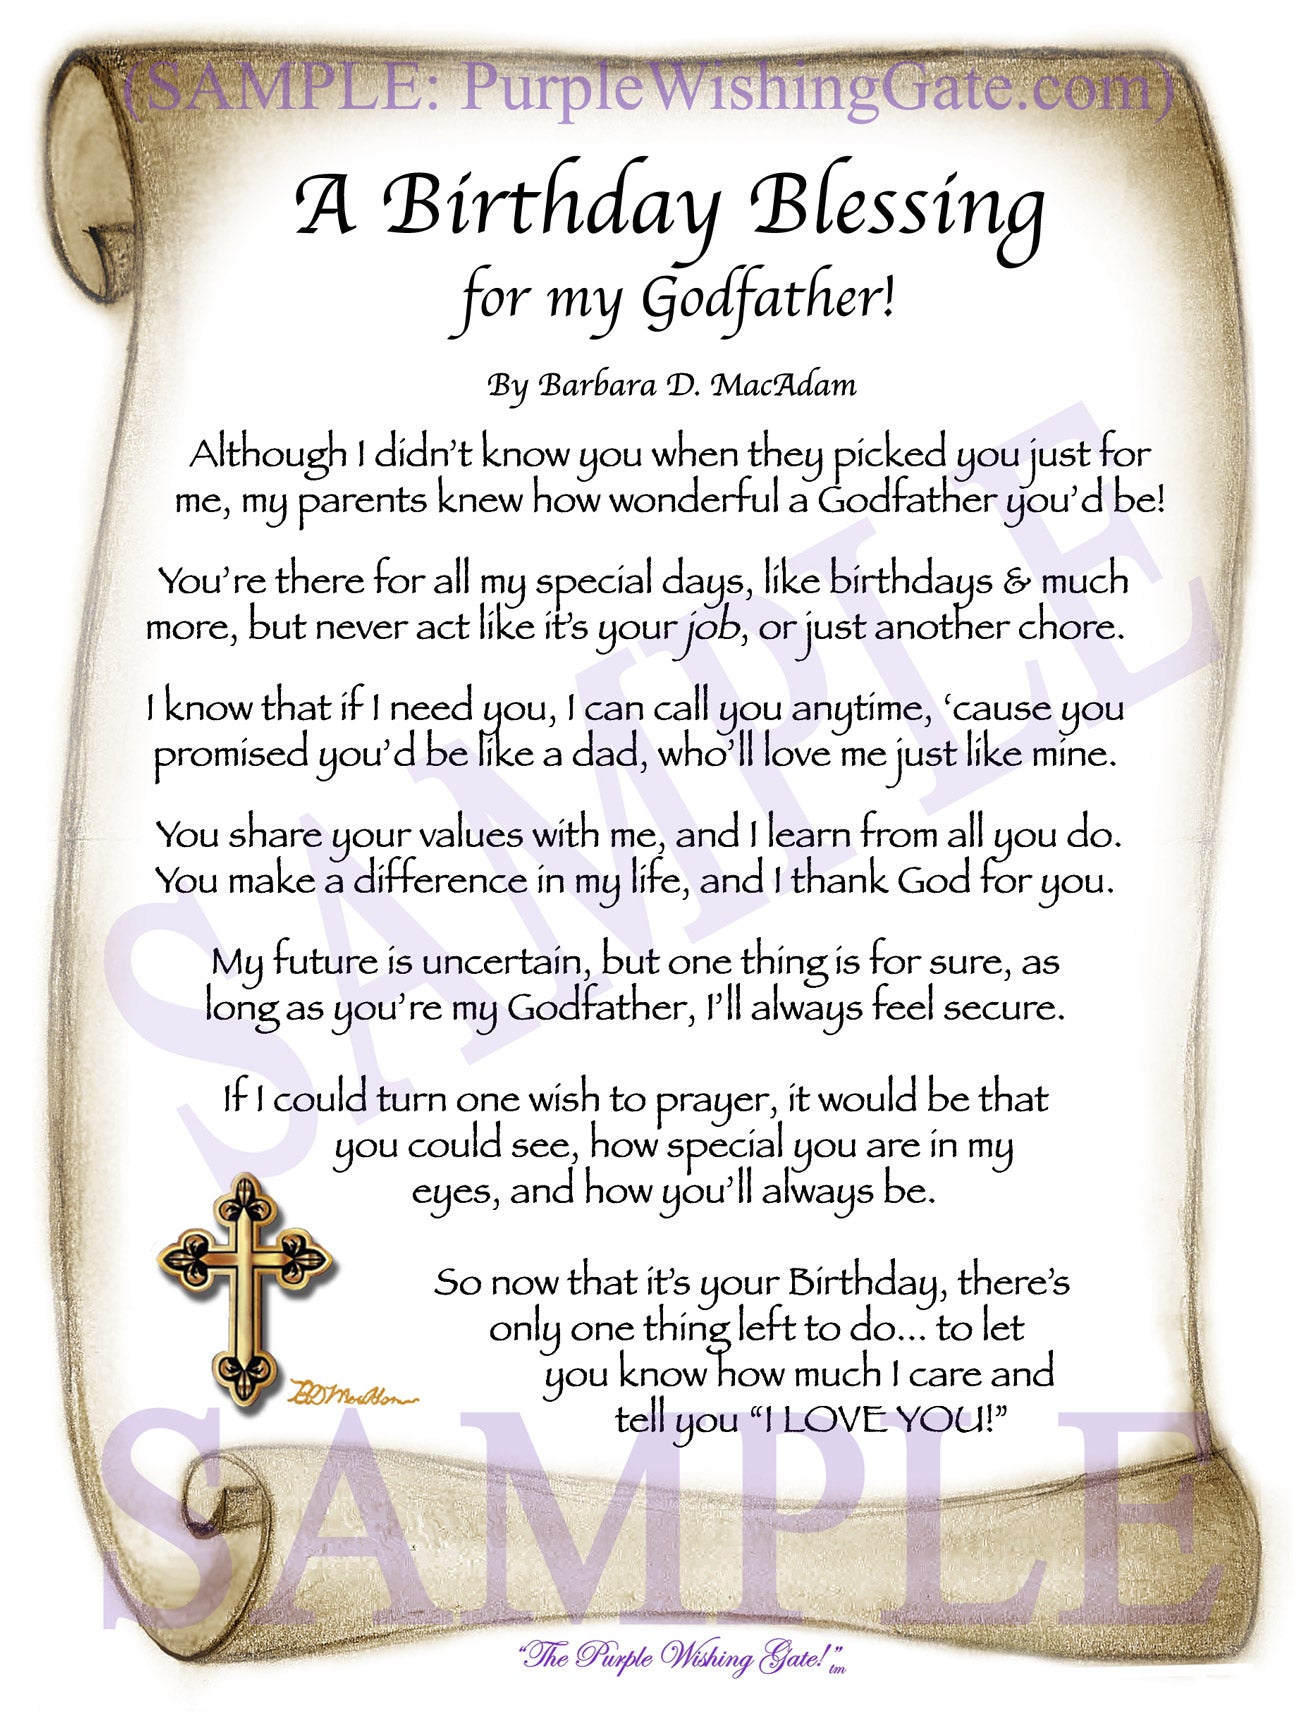 
              
        		A Birthday Blessing for my Godfather! - Birthday Gift - PurpleWishingGate.com
        		
        	